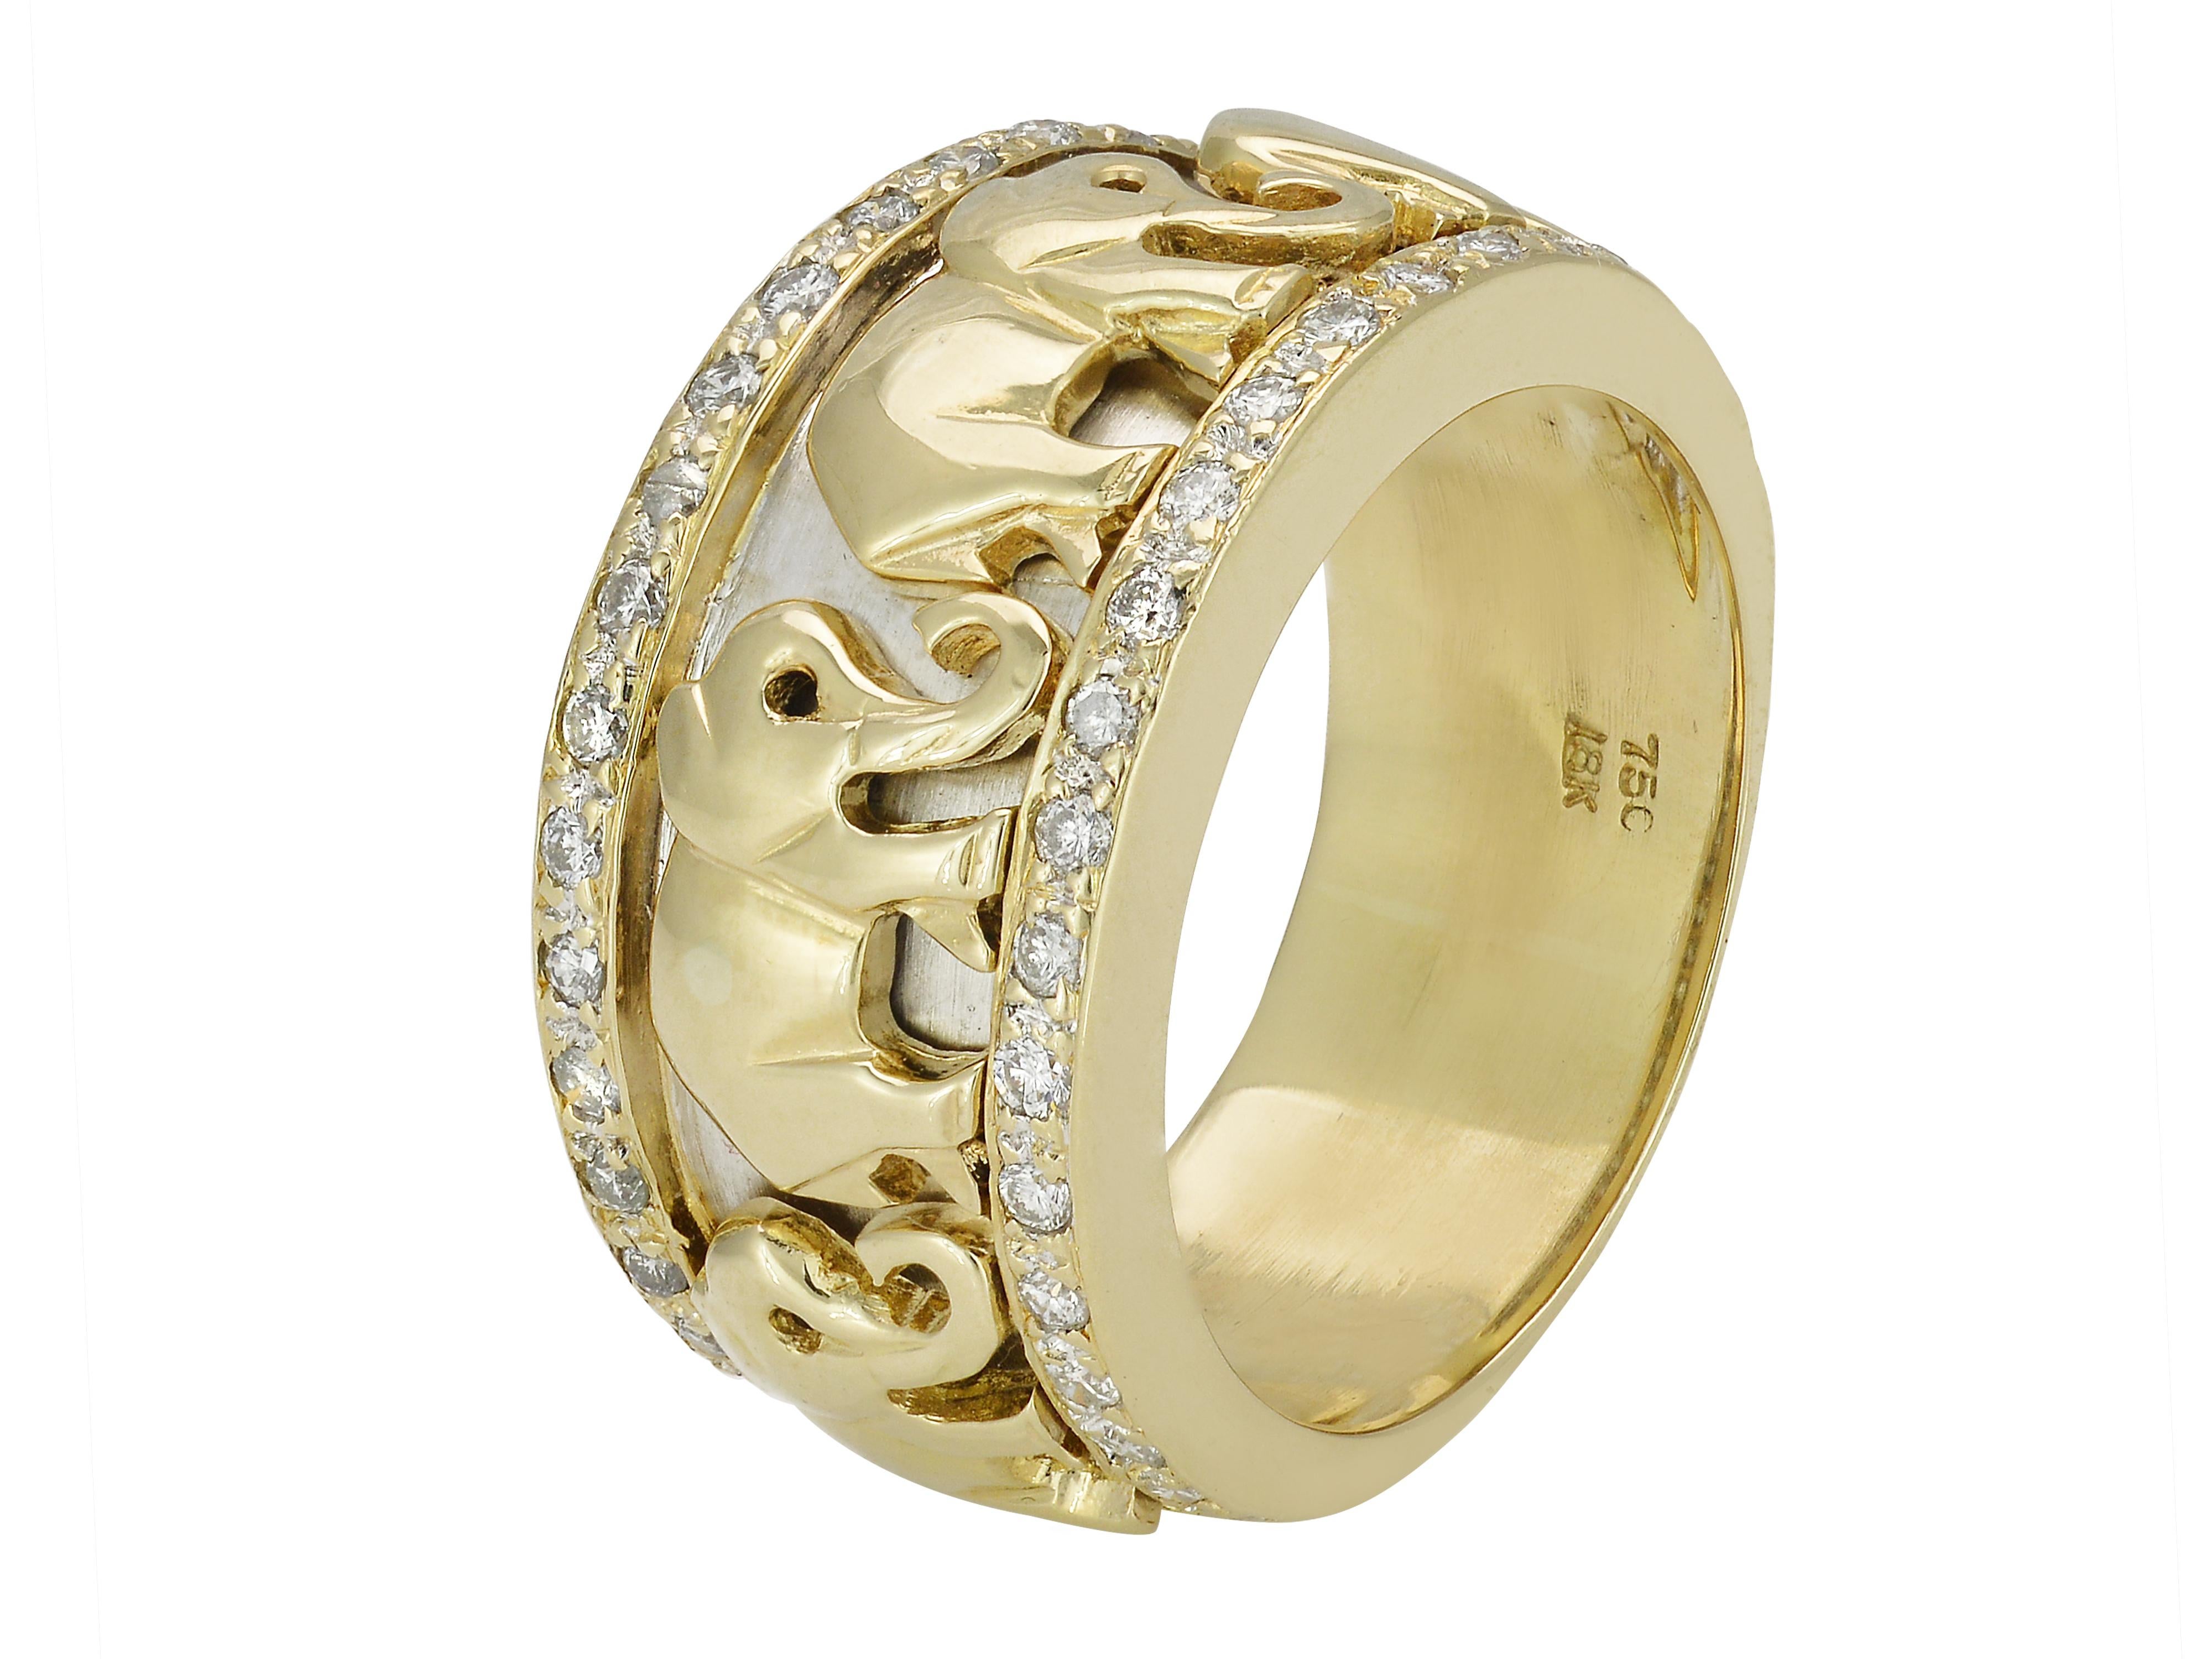 18 Karat Yellow Gold Ring Featuring A Line of Marching Elephants. The Wide Band Features 44 Round Diamonds Totaling Approximately 0.44 Carats of VS Clarity & H Color. Width at the Top is 12mm; Bottom Width is 9.5mm. Finger Size 8; Purchase Includes